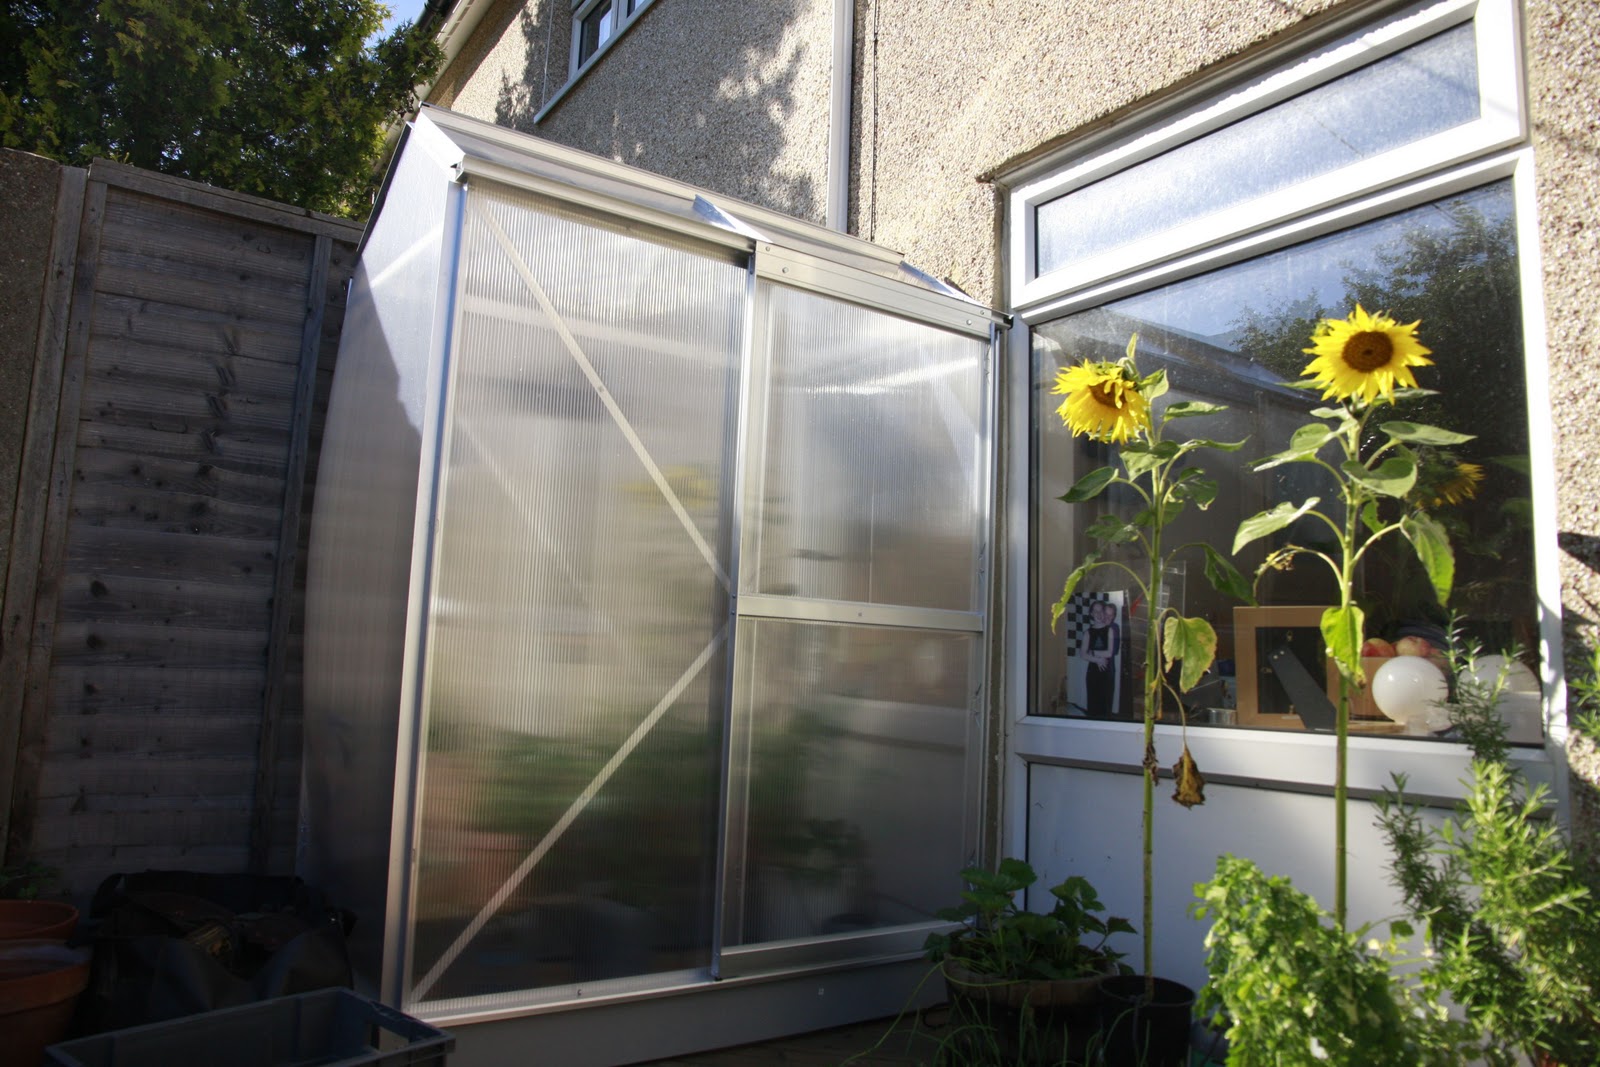 g: Argos 'walk-in' Greenhouse review